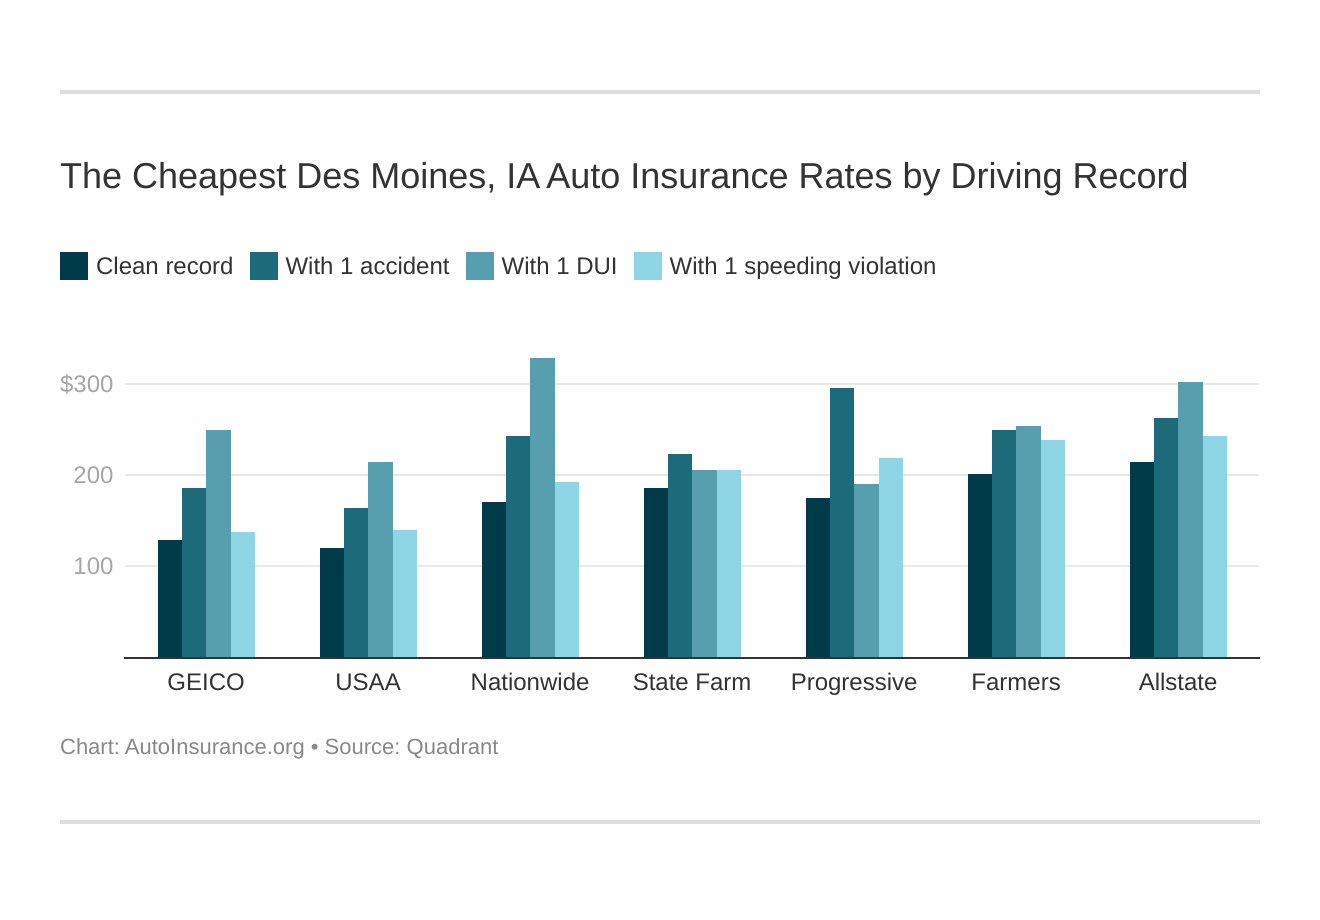 The Cheapest Des Moines, IA Auto Insurance Rates by Driving Record